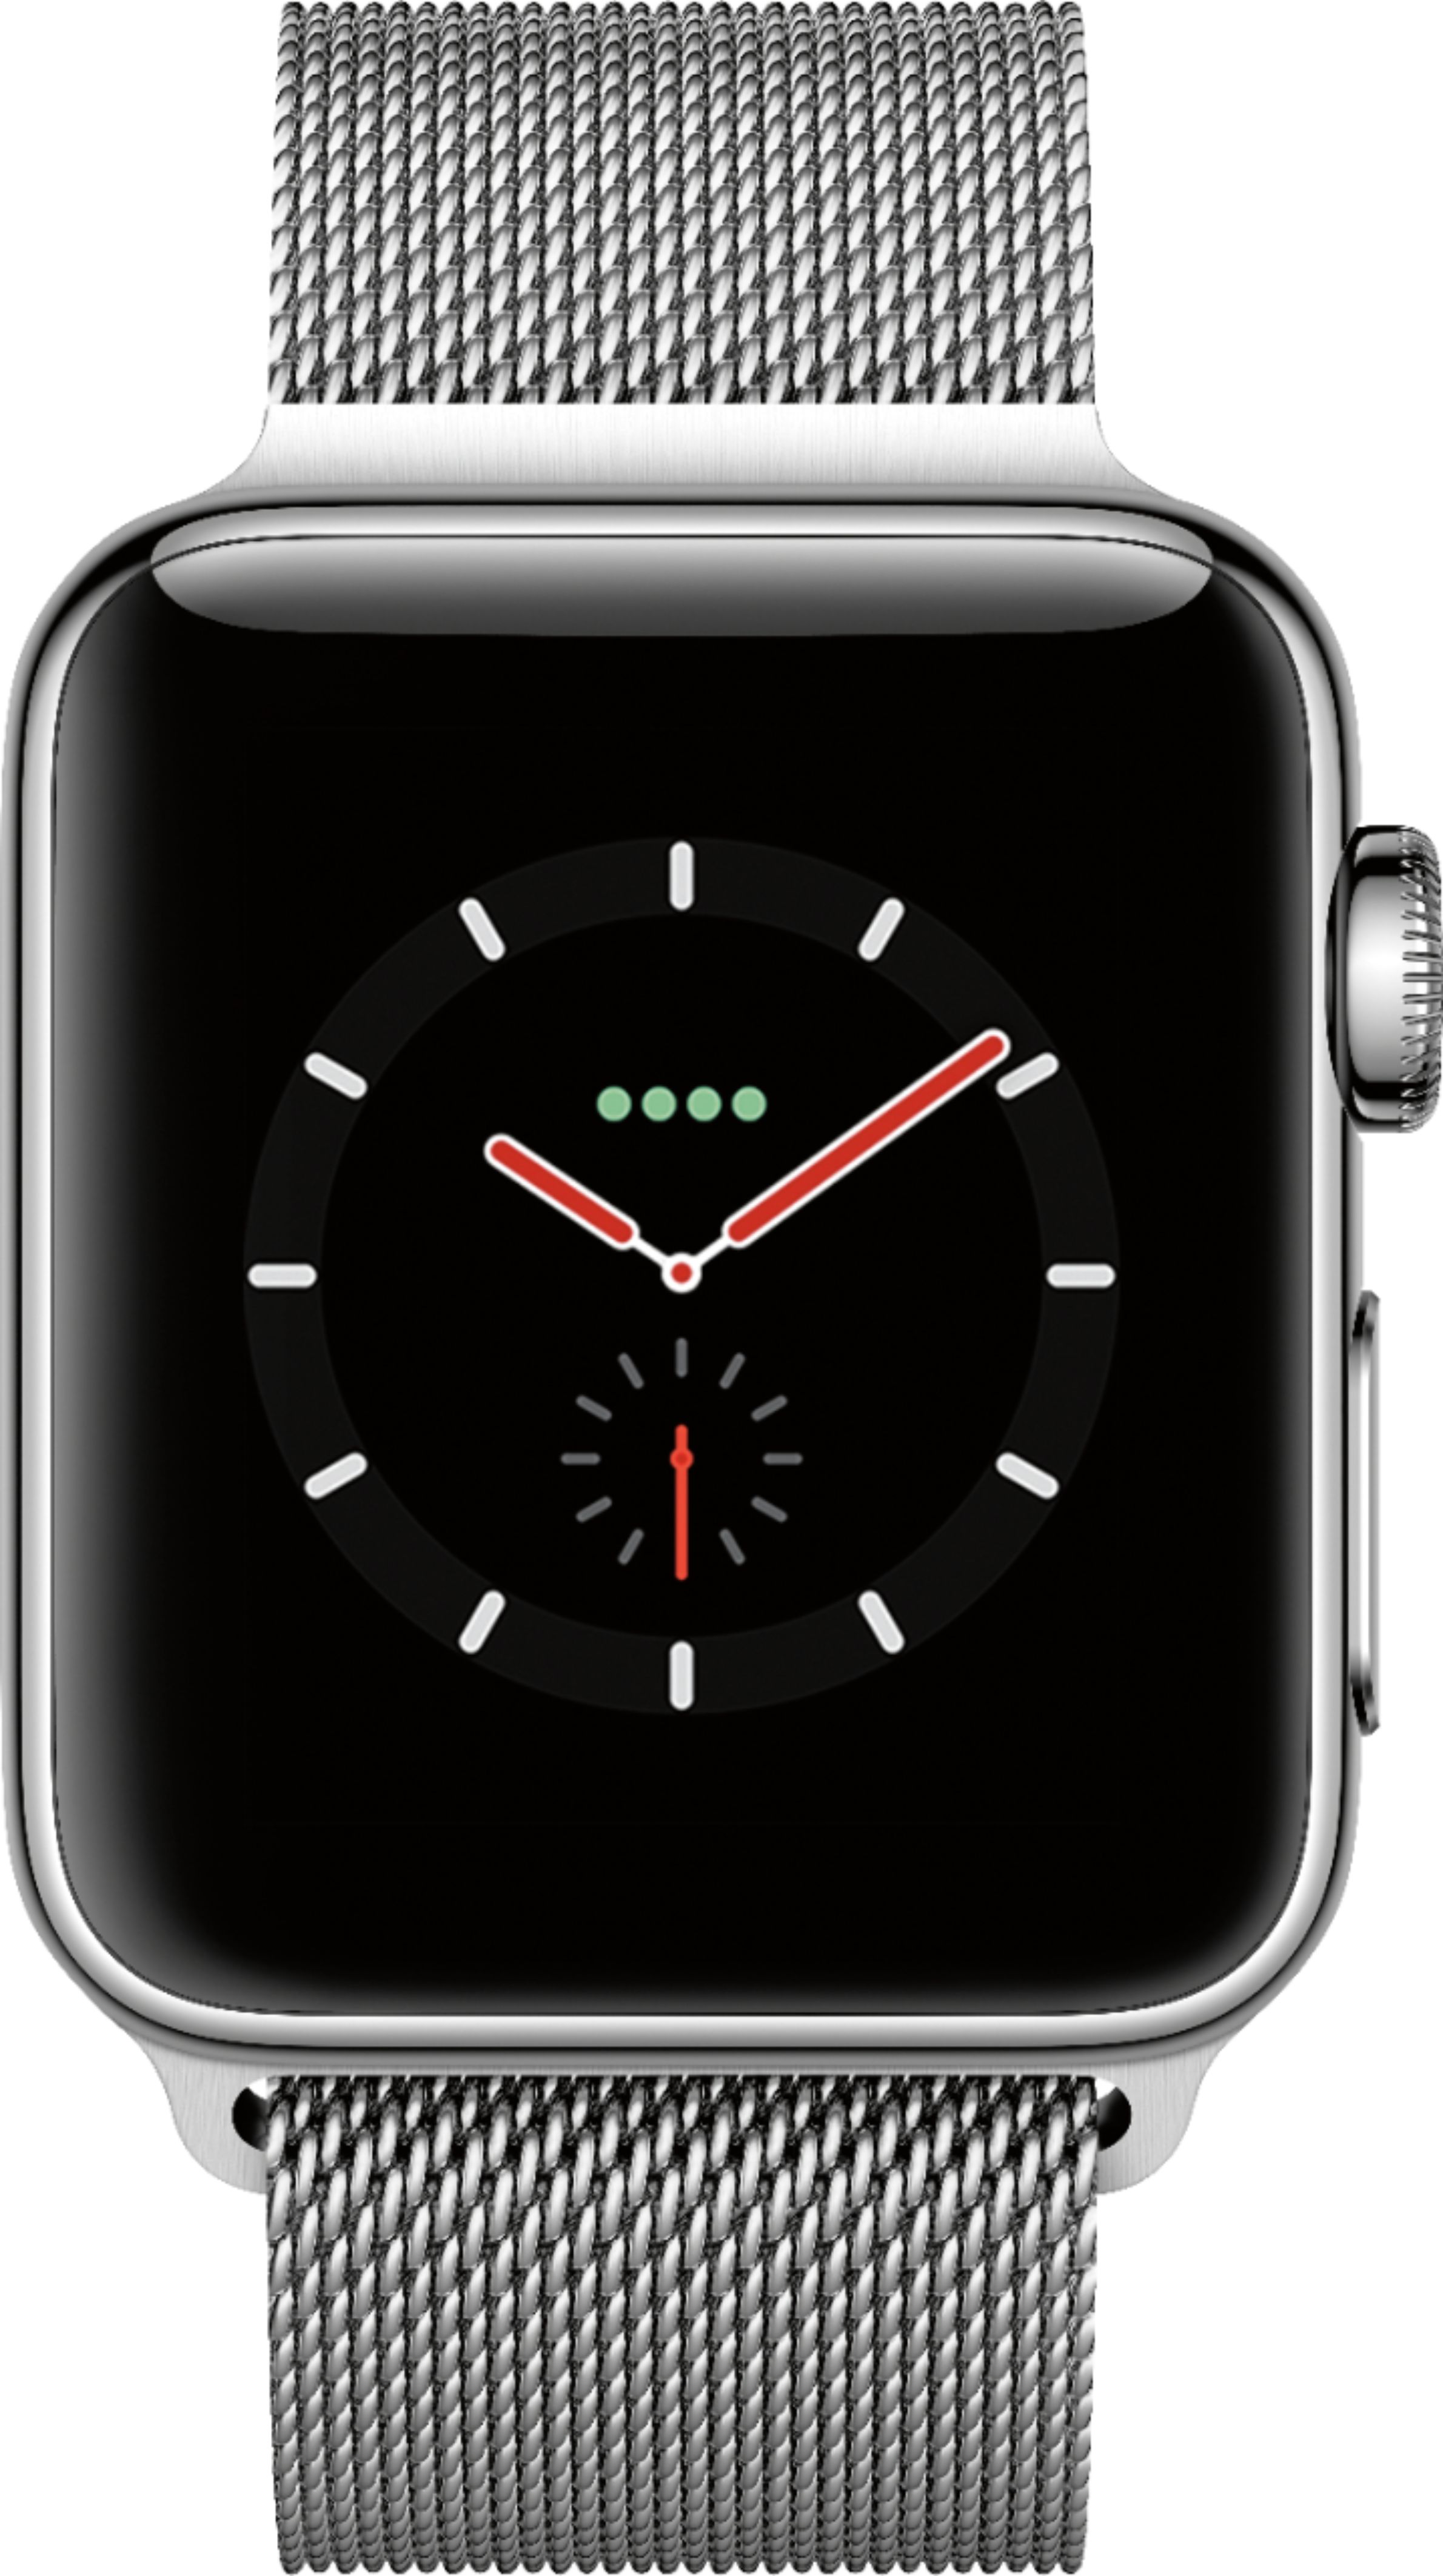 Best Buy: Apple Watch Series 3 (GPS + Cellular) 38mm Stainless